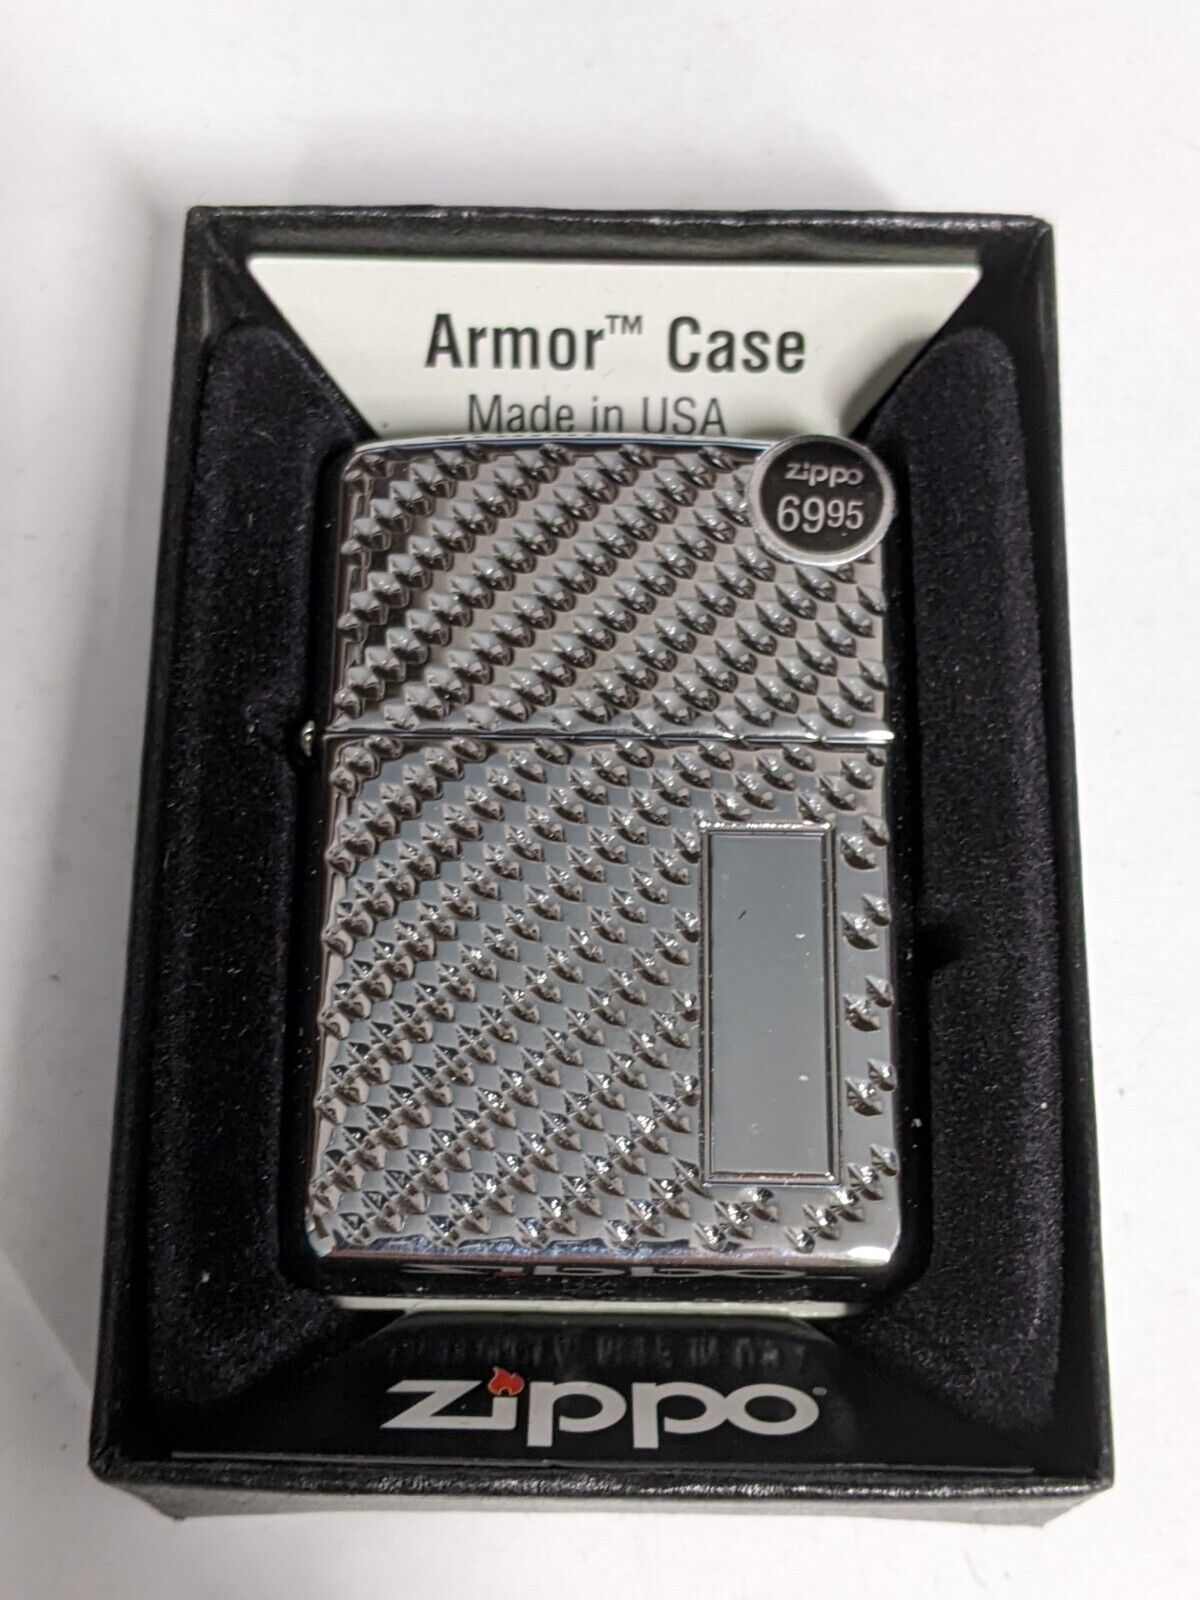 ZIPPO 2011 ENGING TURN PEBBLE ARMOR CASE LIGHTER SEALED IN BOX R737